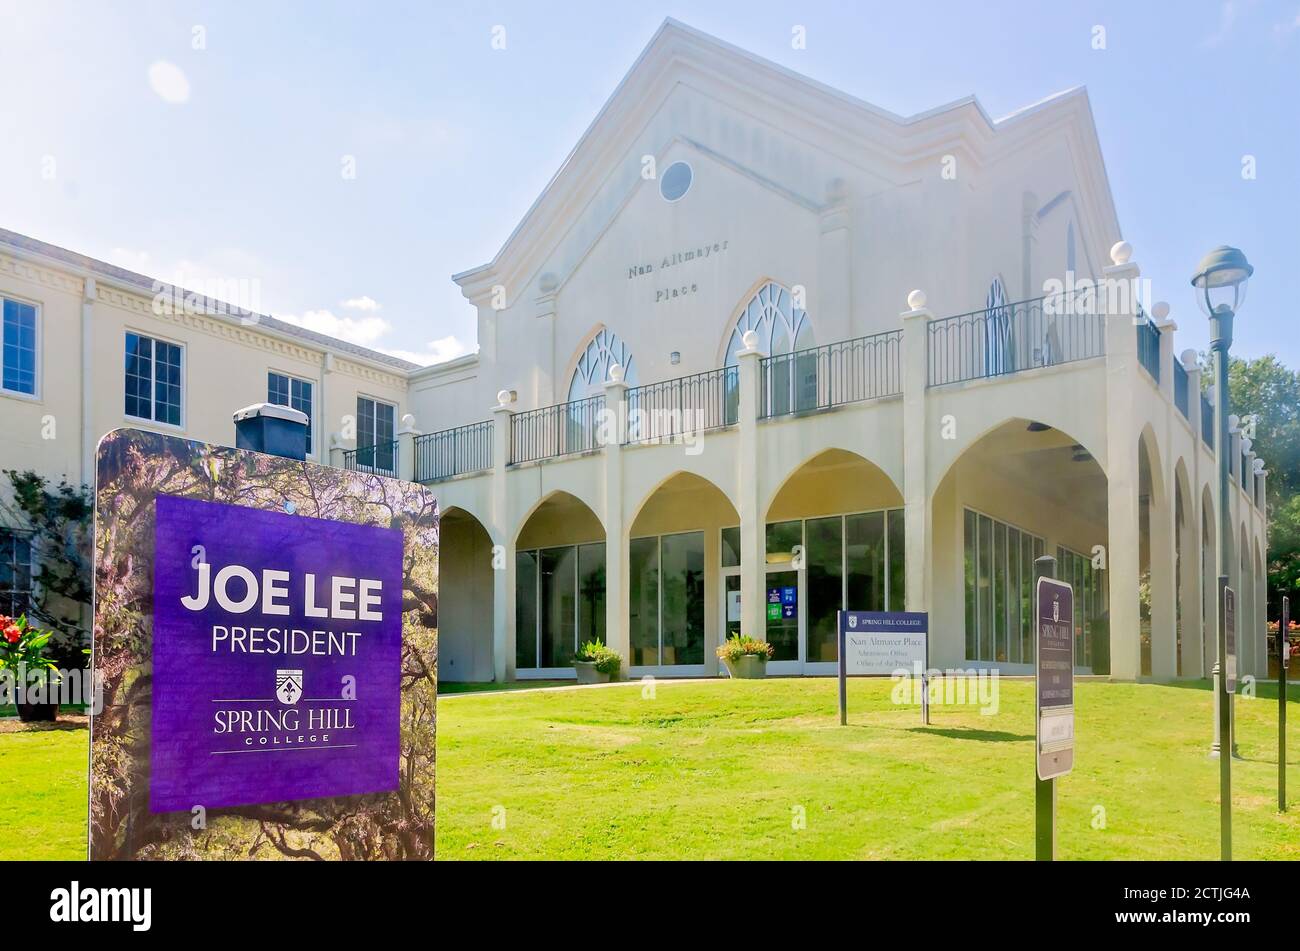 Nan Altmayer Place, which houses the admissions office and President Joe Lee’s office, is pictured at Spring Hill College, Aug. 22, 2020, in Mobile, A Stock Photo